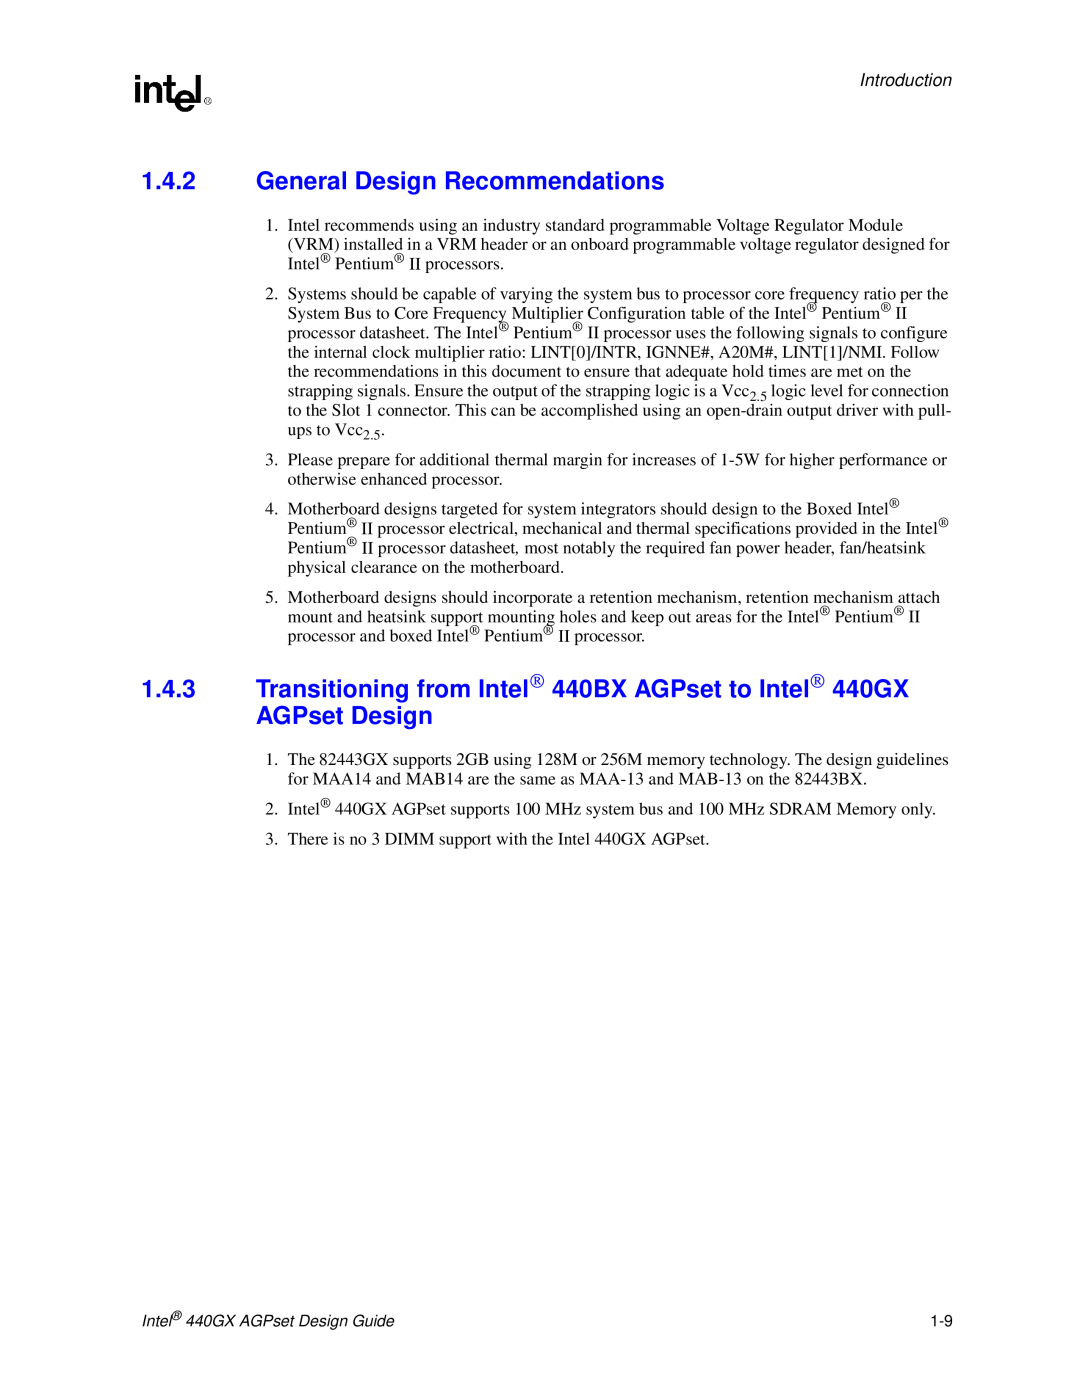 Intel General Design Recommendations, Transitioning from Intel 440BX AGPset to Intel 440GX, AGPset Design, Introduction 